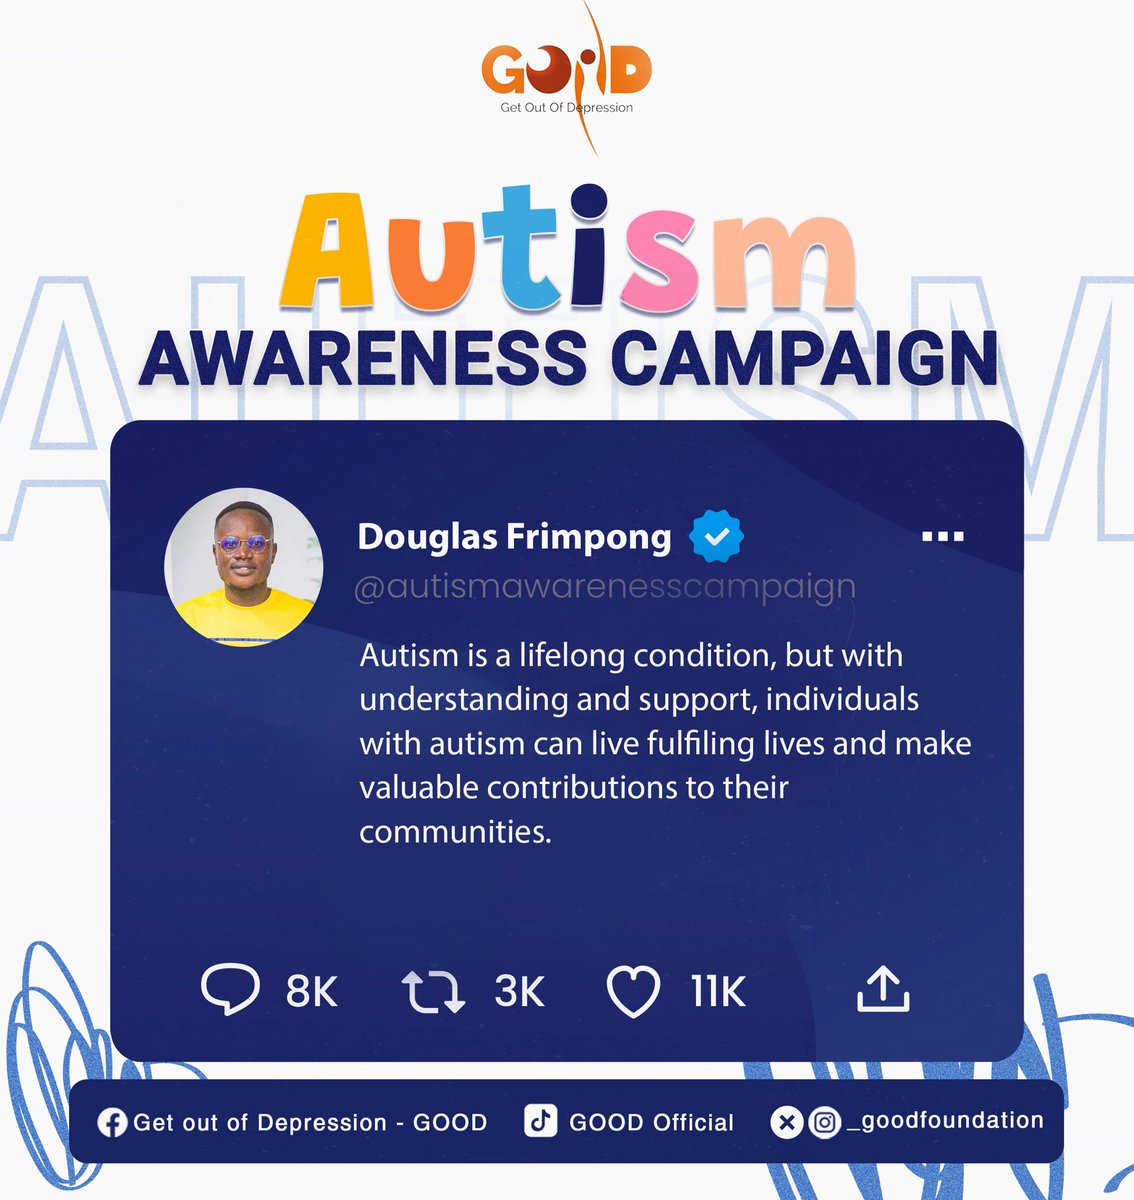 Persons with autism brighten up our world too, oh how numerous their abilities are!

#AutismAcceptance 
#Autism 
#AutismAwarenessMonth